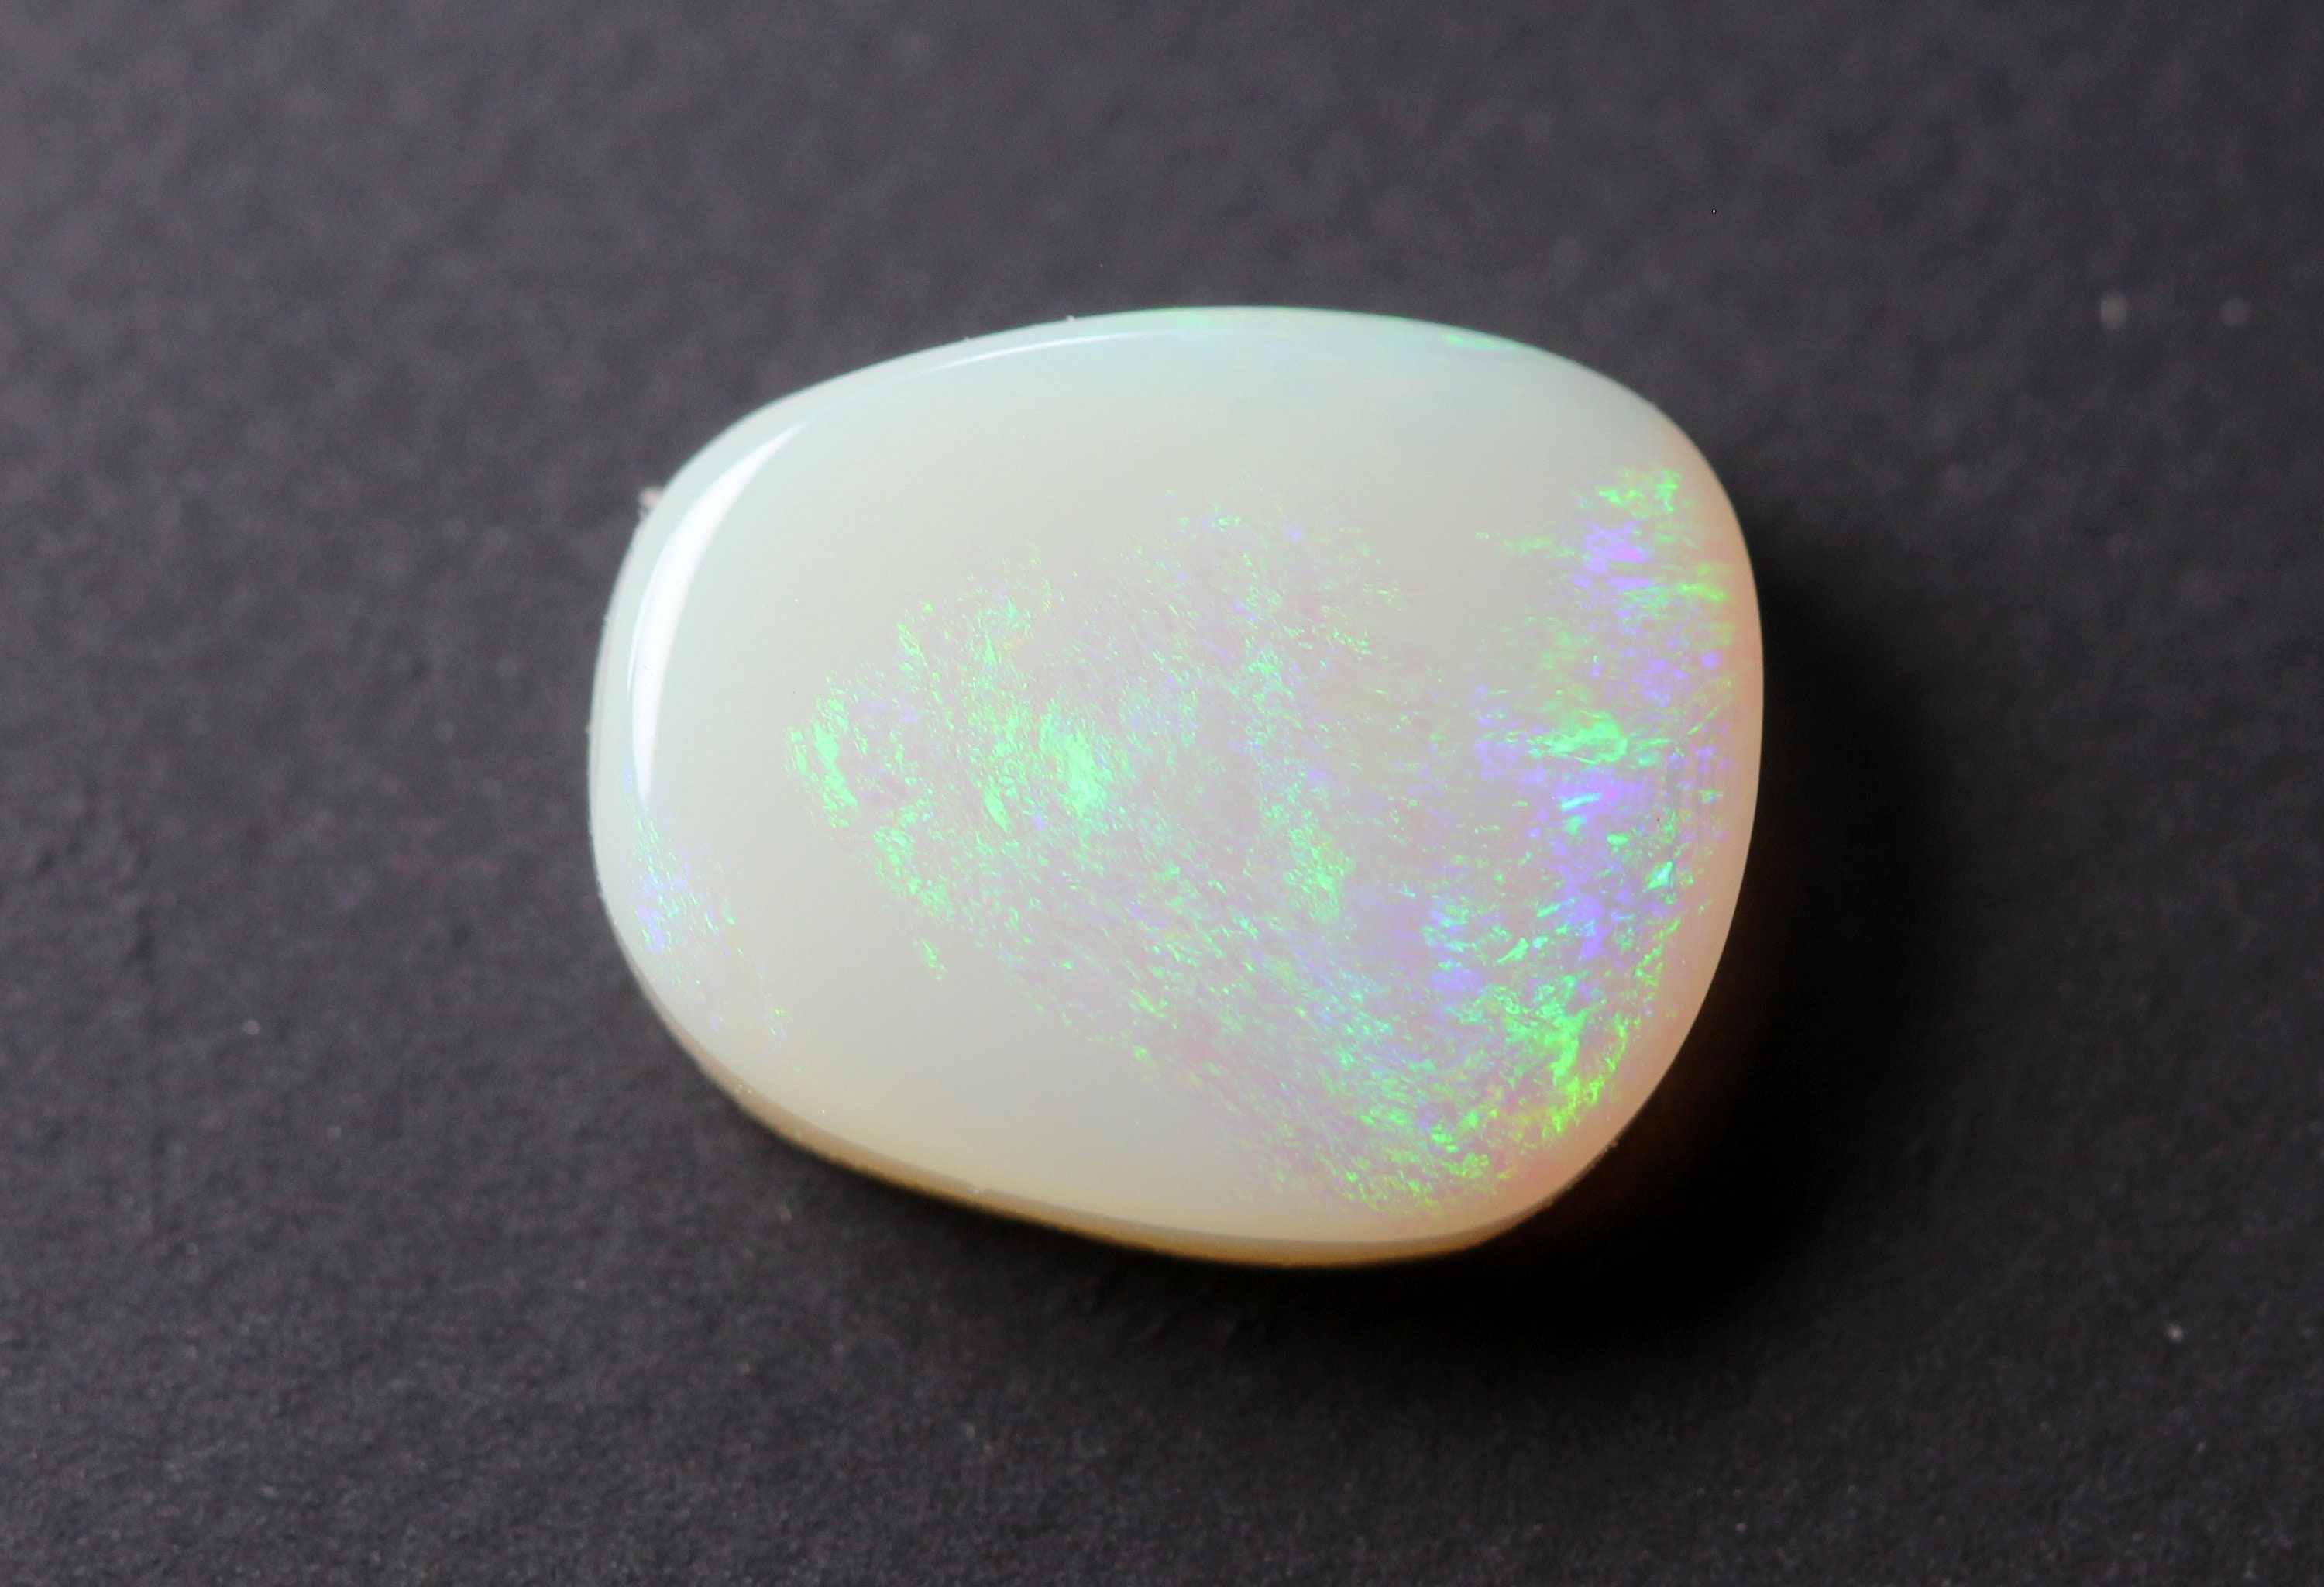 39X20X5 mm AO-1192 Wonderful Top Grade Quality 100% Natural Owyhee Blue Opal Oval Shape Cabochon Loose Gemstone For Making Jewelry 31 Ct